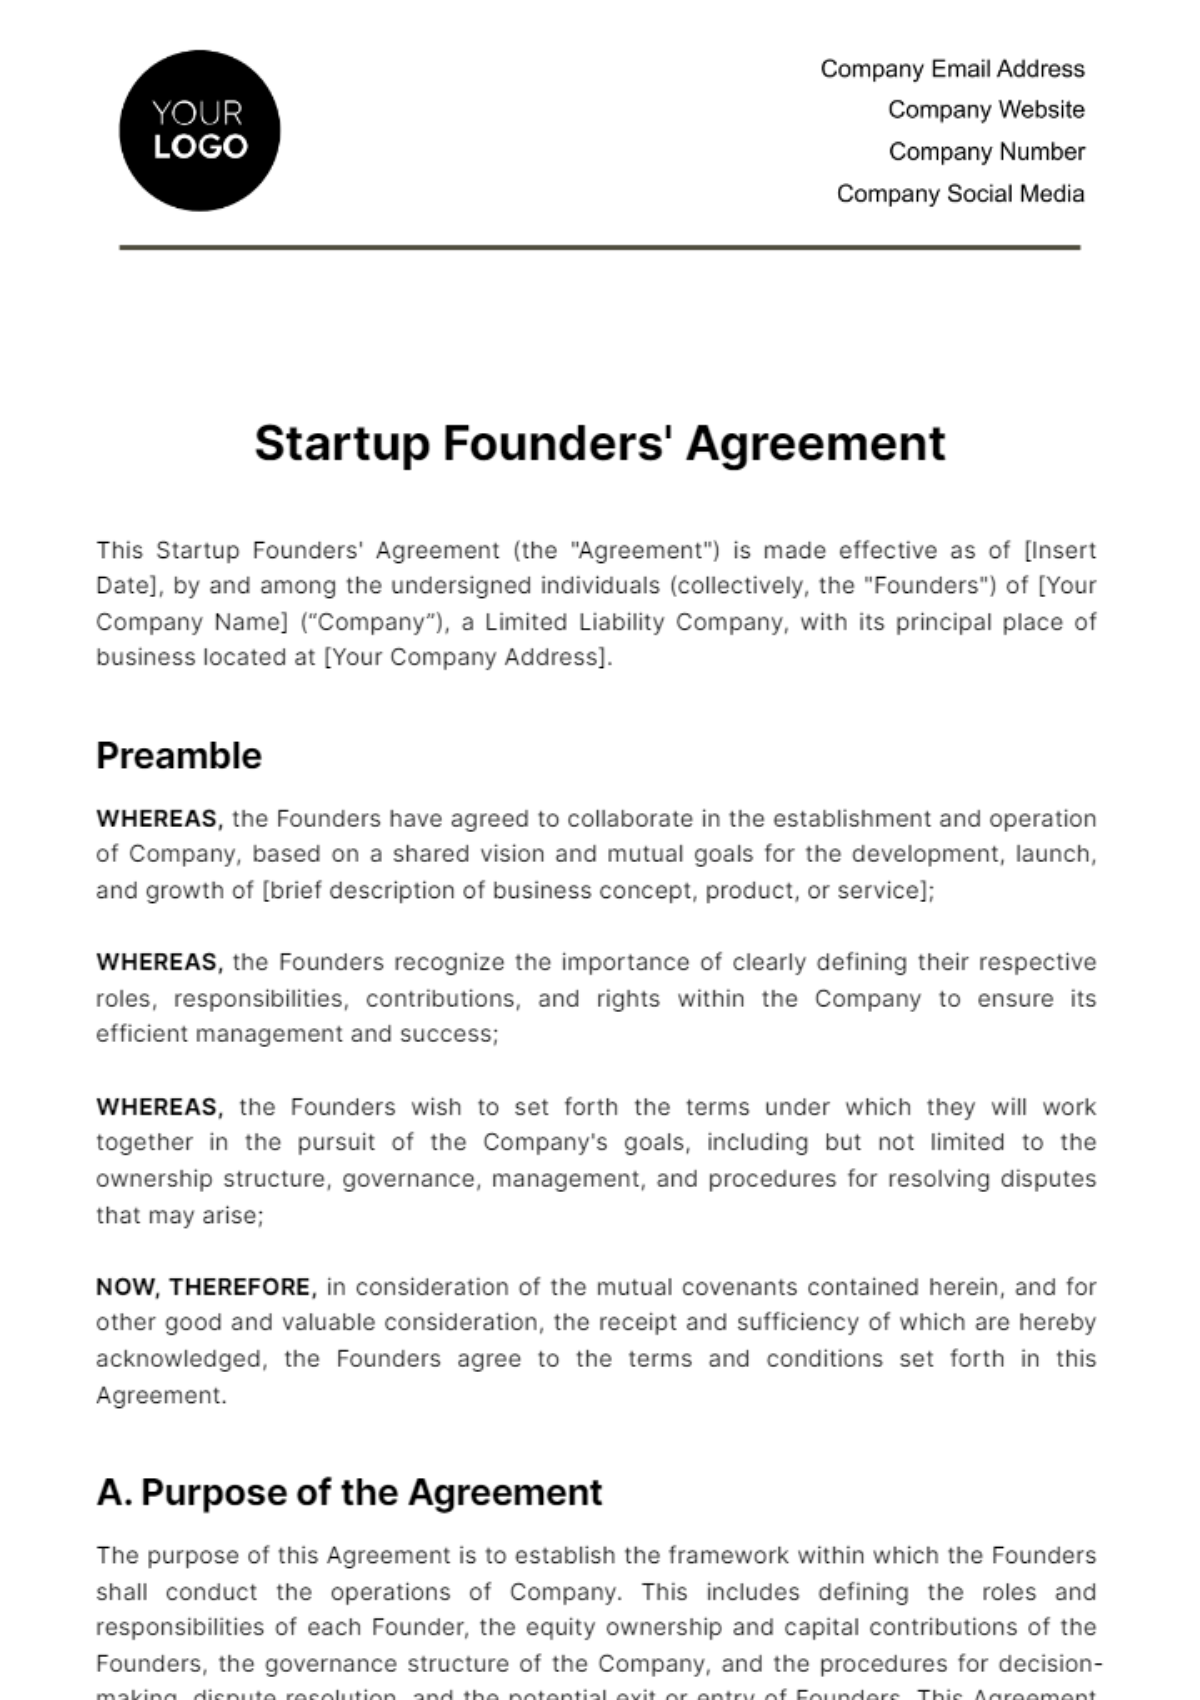 Free Startup Founders' Agreement Template